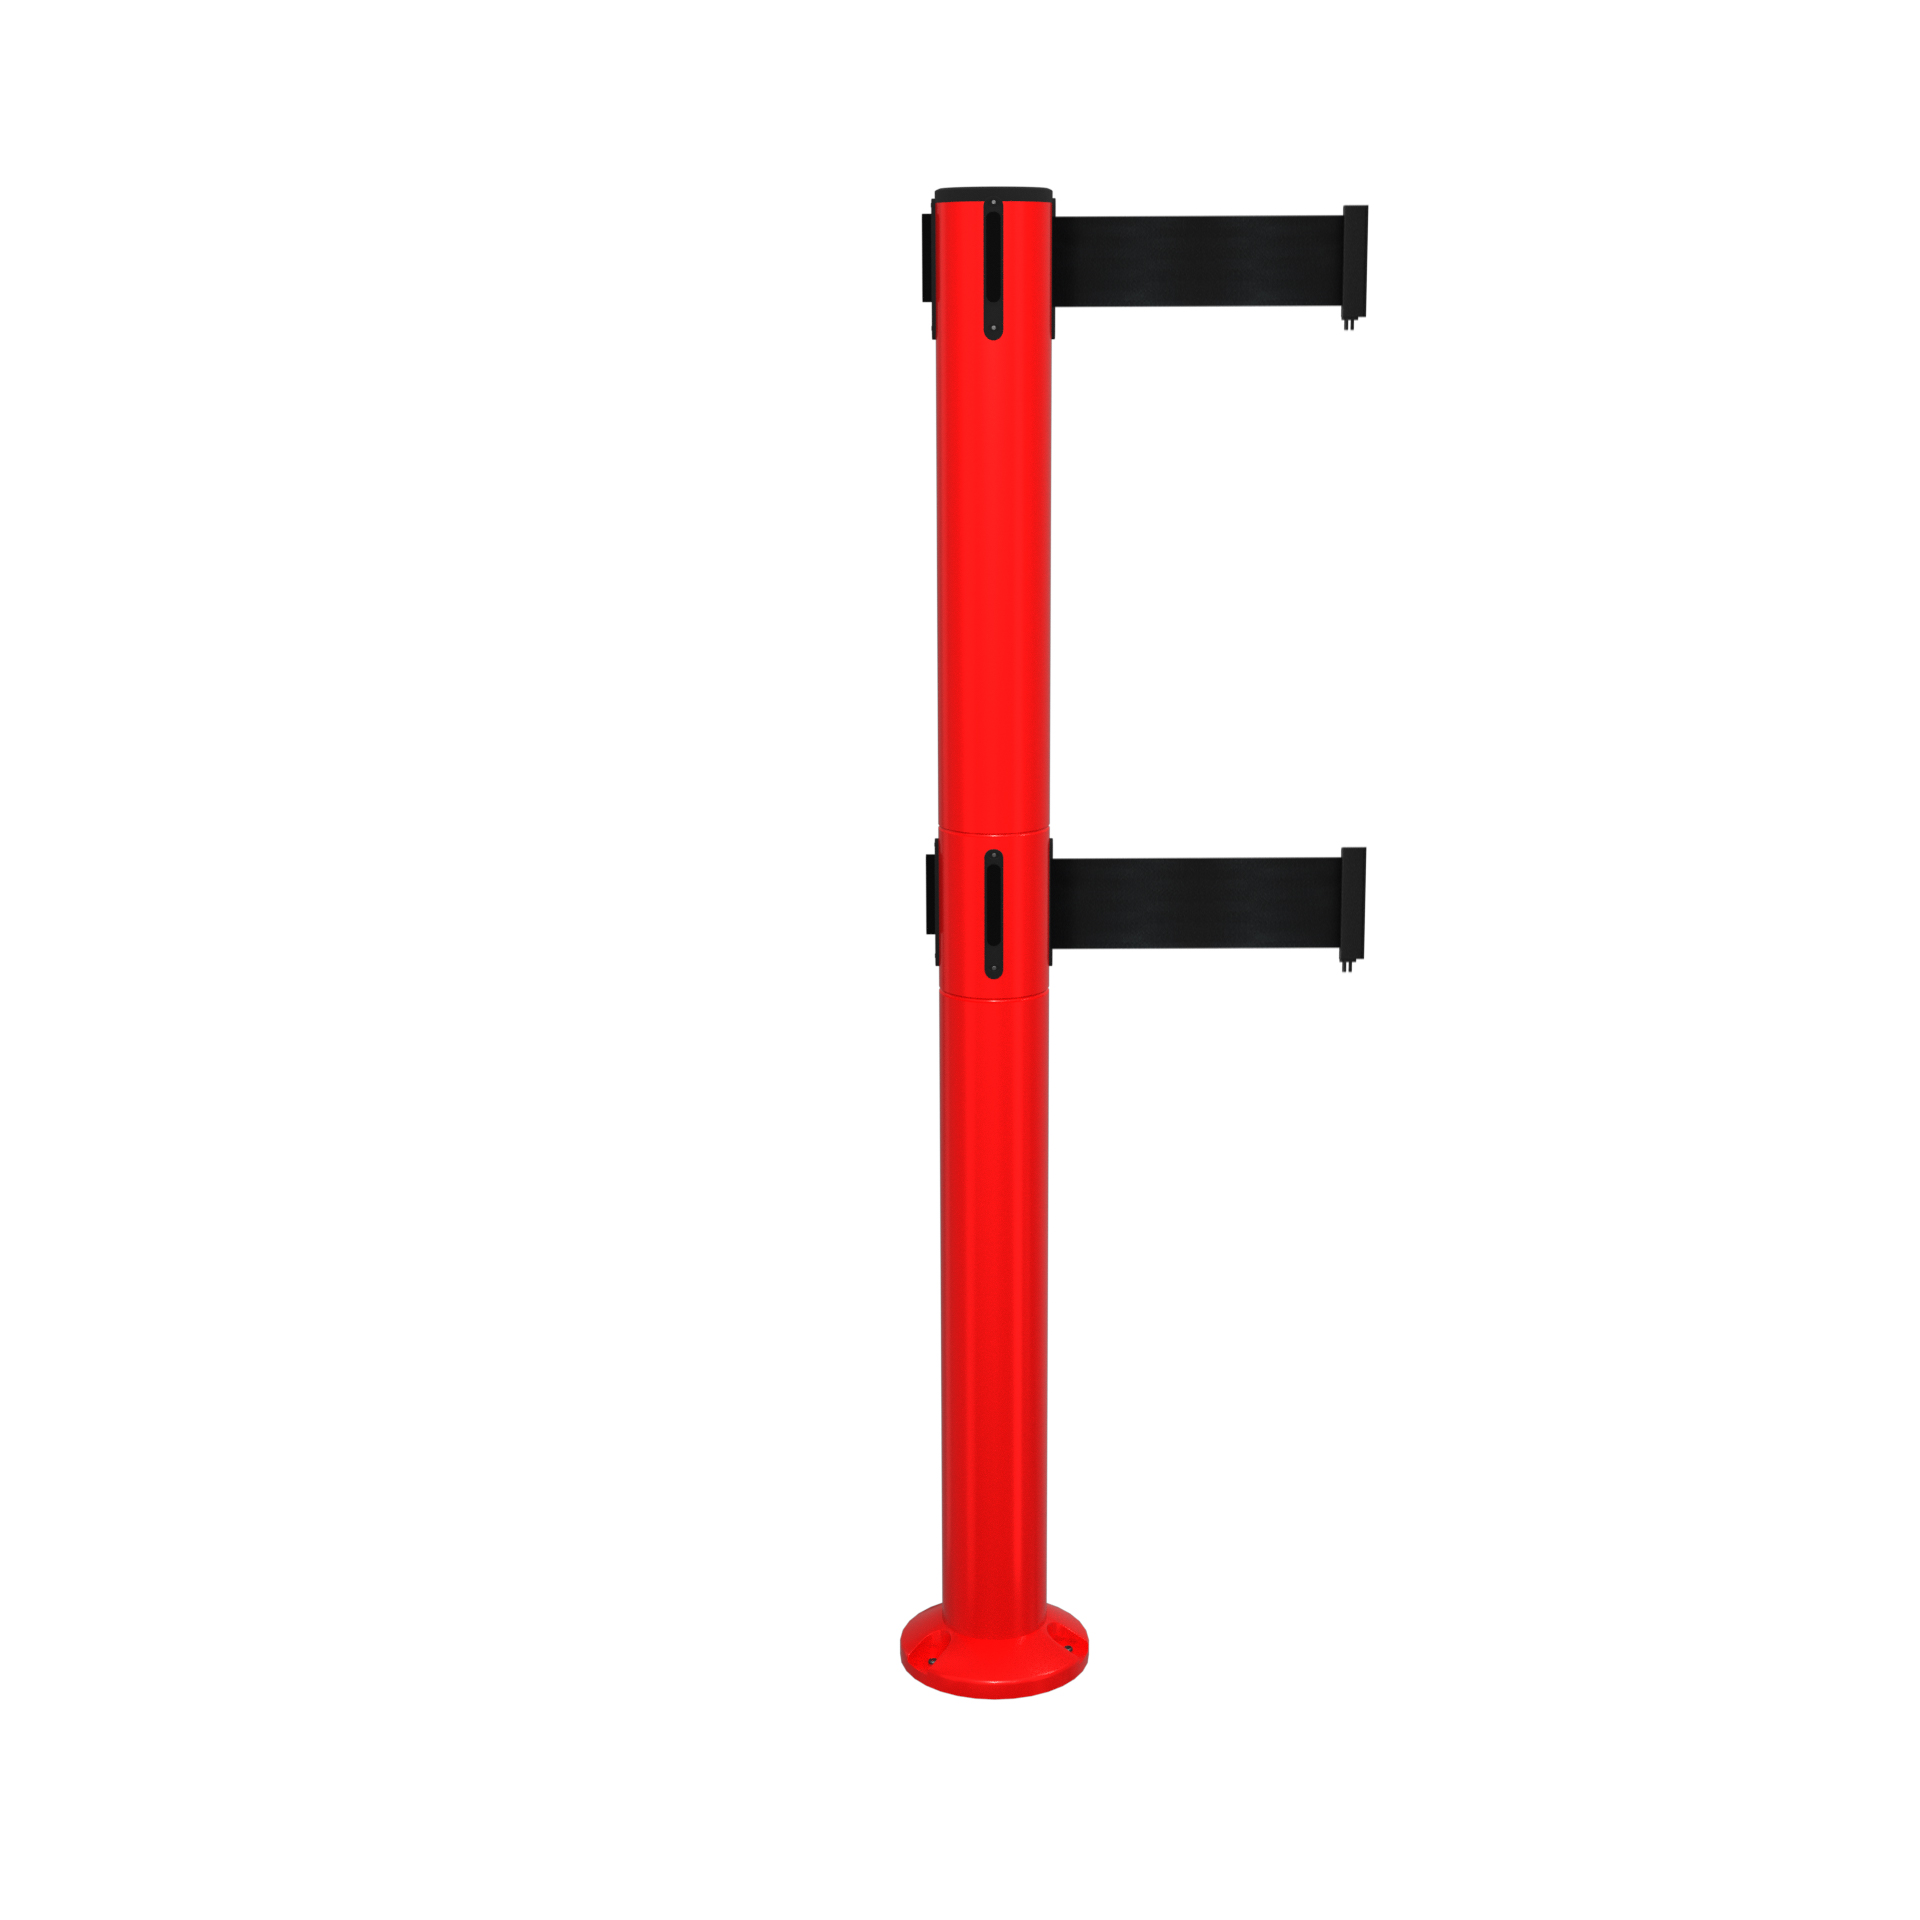 Red SafetyPro 300 Fixed Retractable Belt Barrier with Twin Belts